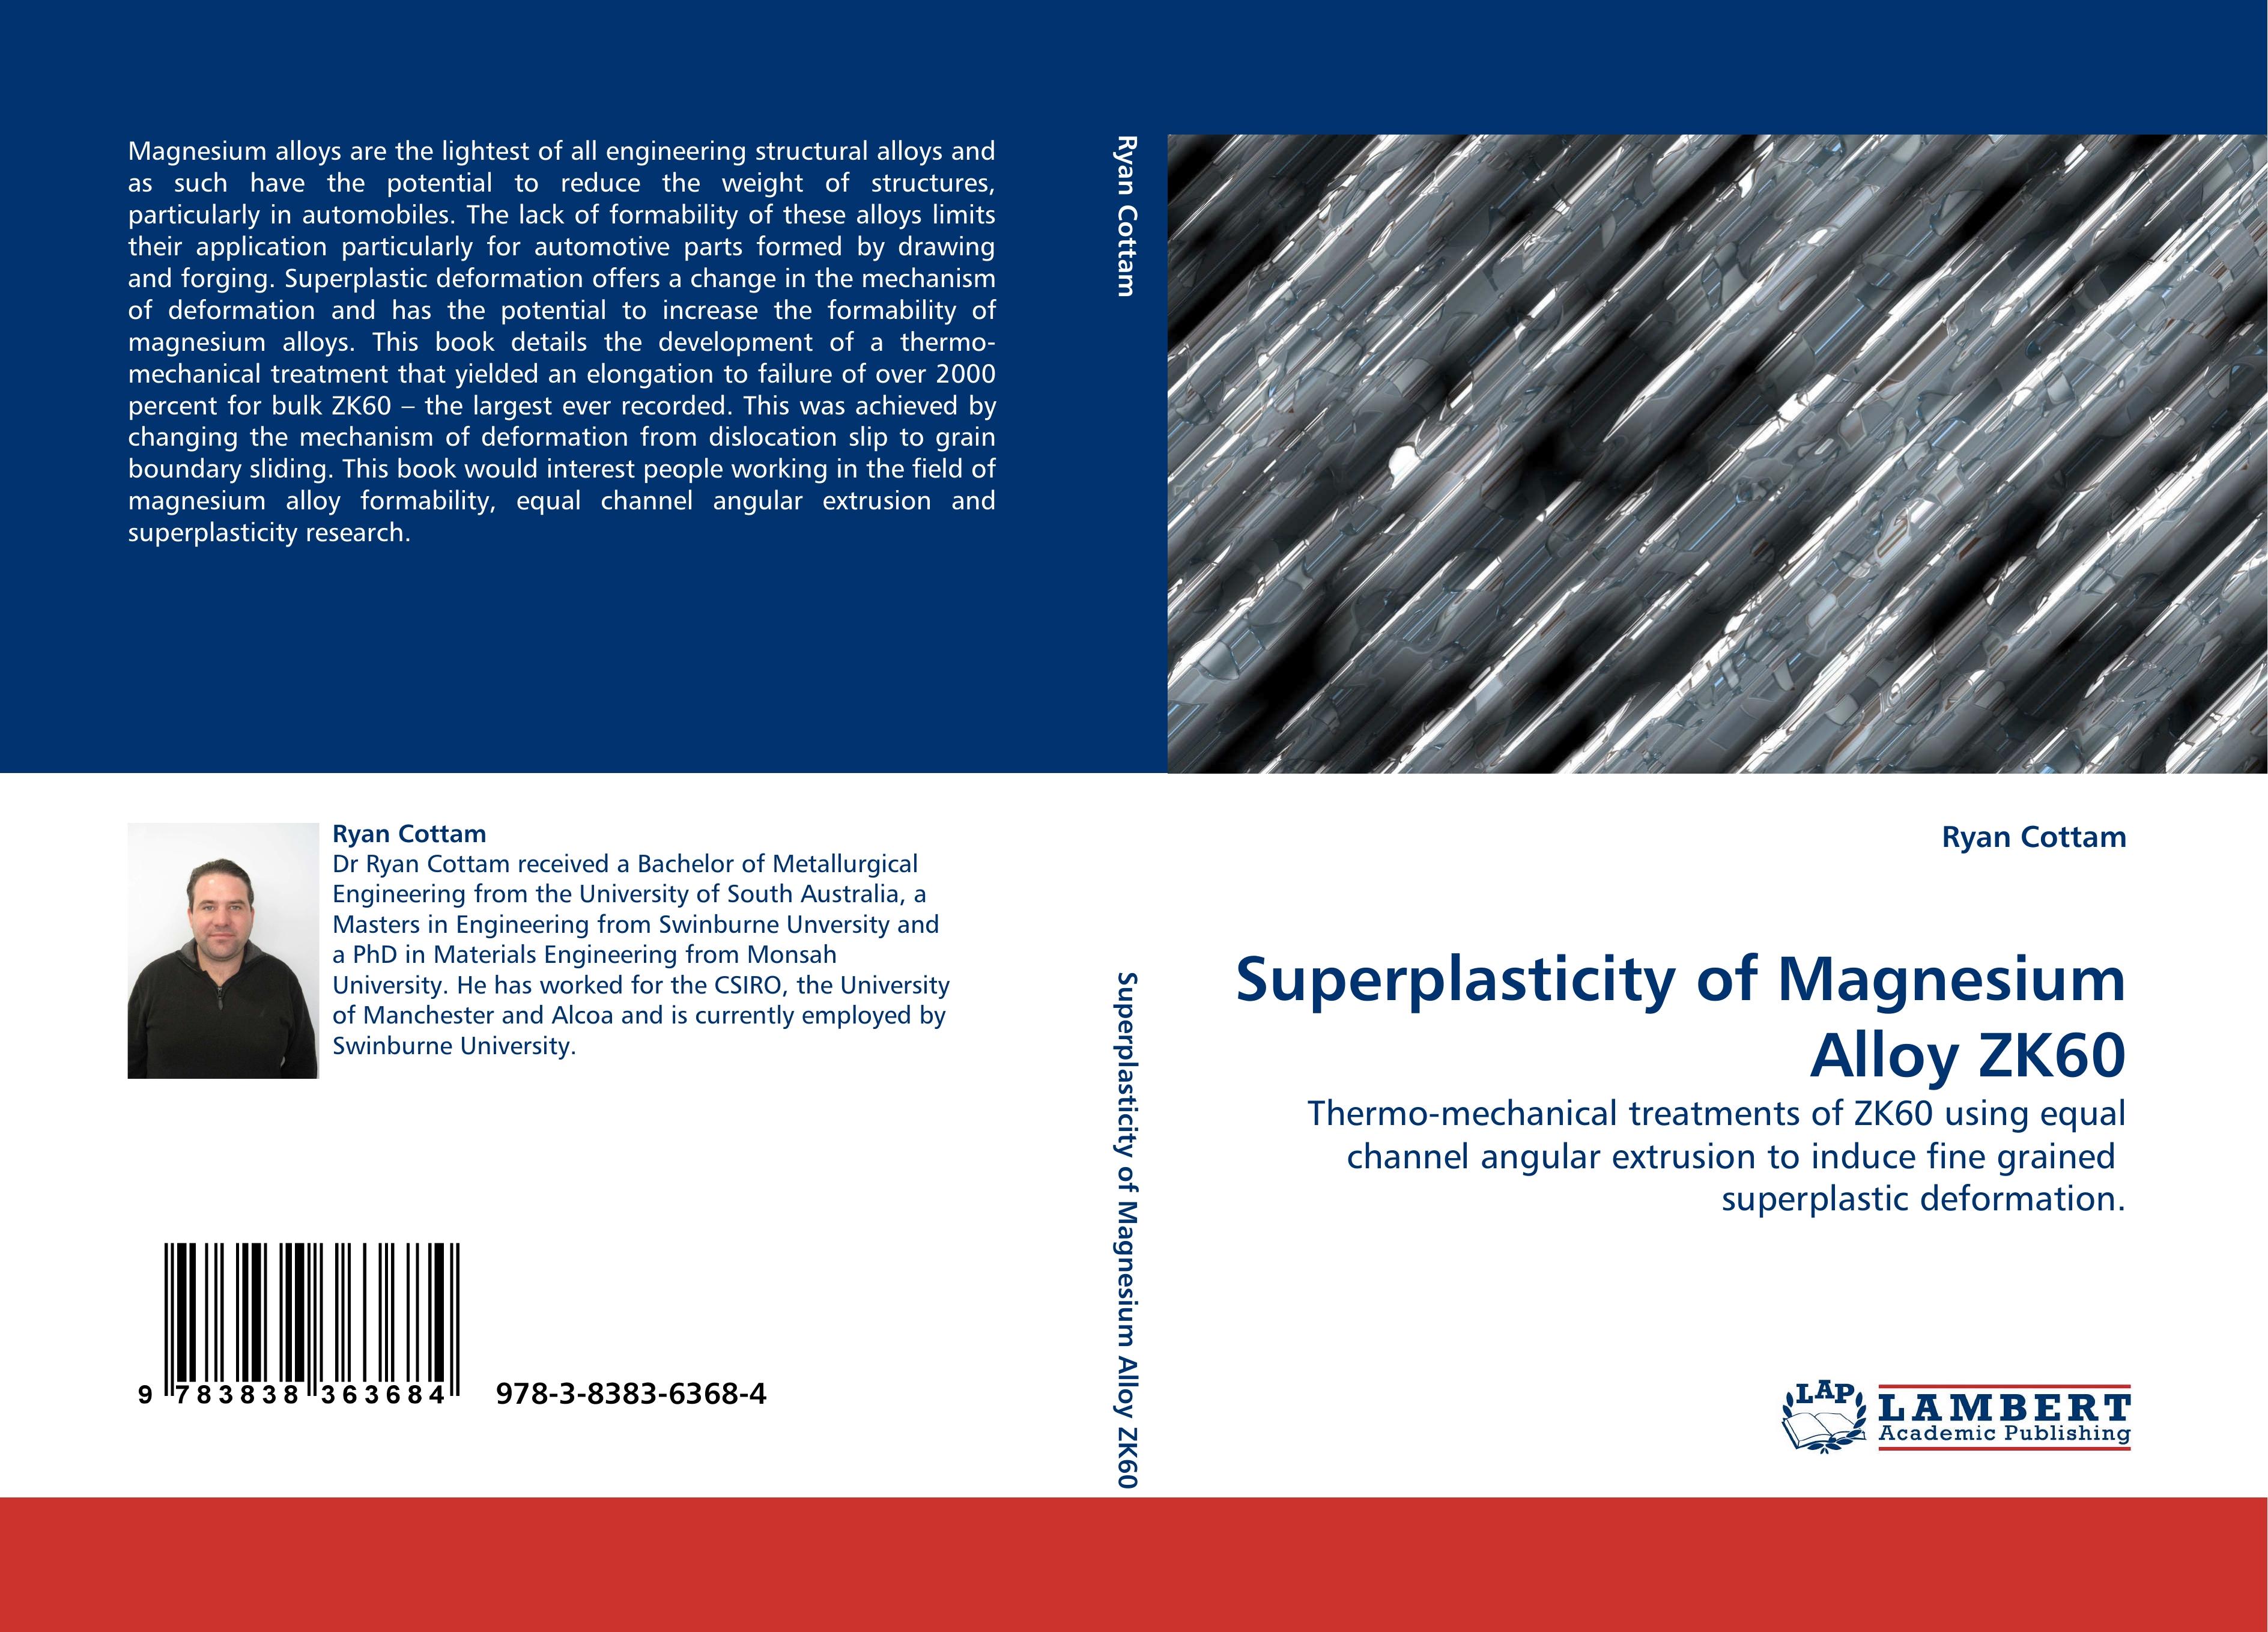 Superplasticity of Magnesium Alloy ZK60 | Thermo-mechanical treatments of ZK60 using equal channel angular extrusion to induce fine grained superplastic deformation. | Ryan Cottam | Taschenbuch | 2010 - Cottam, Ryan